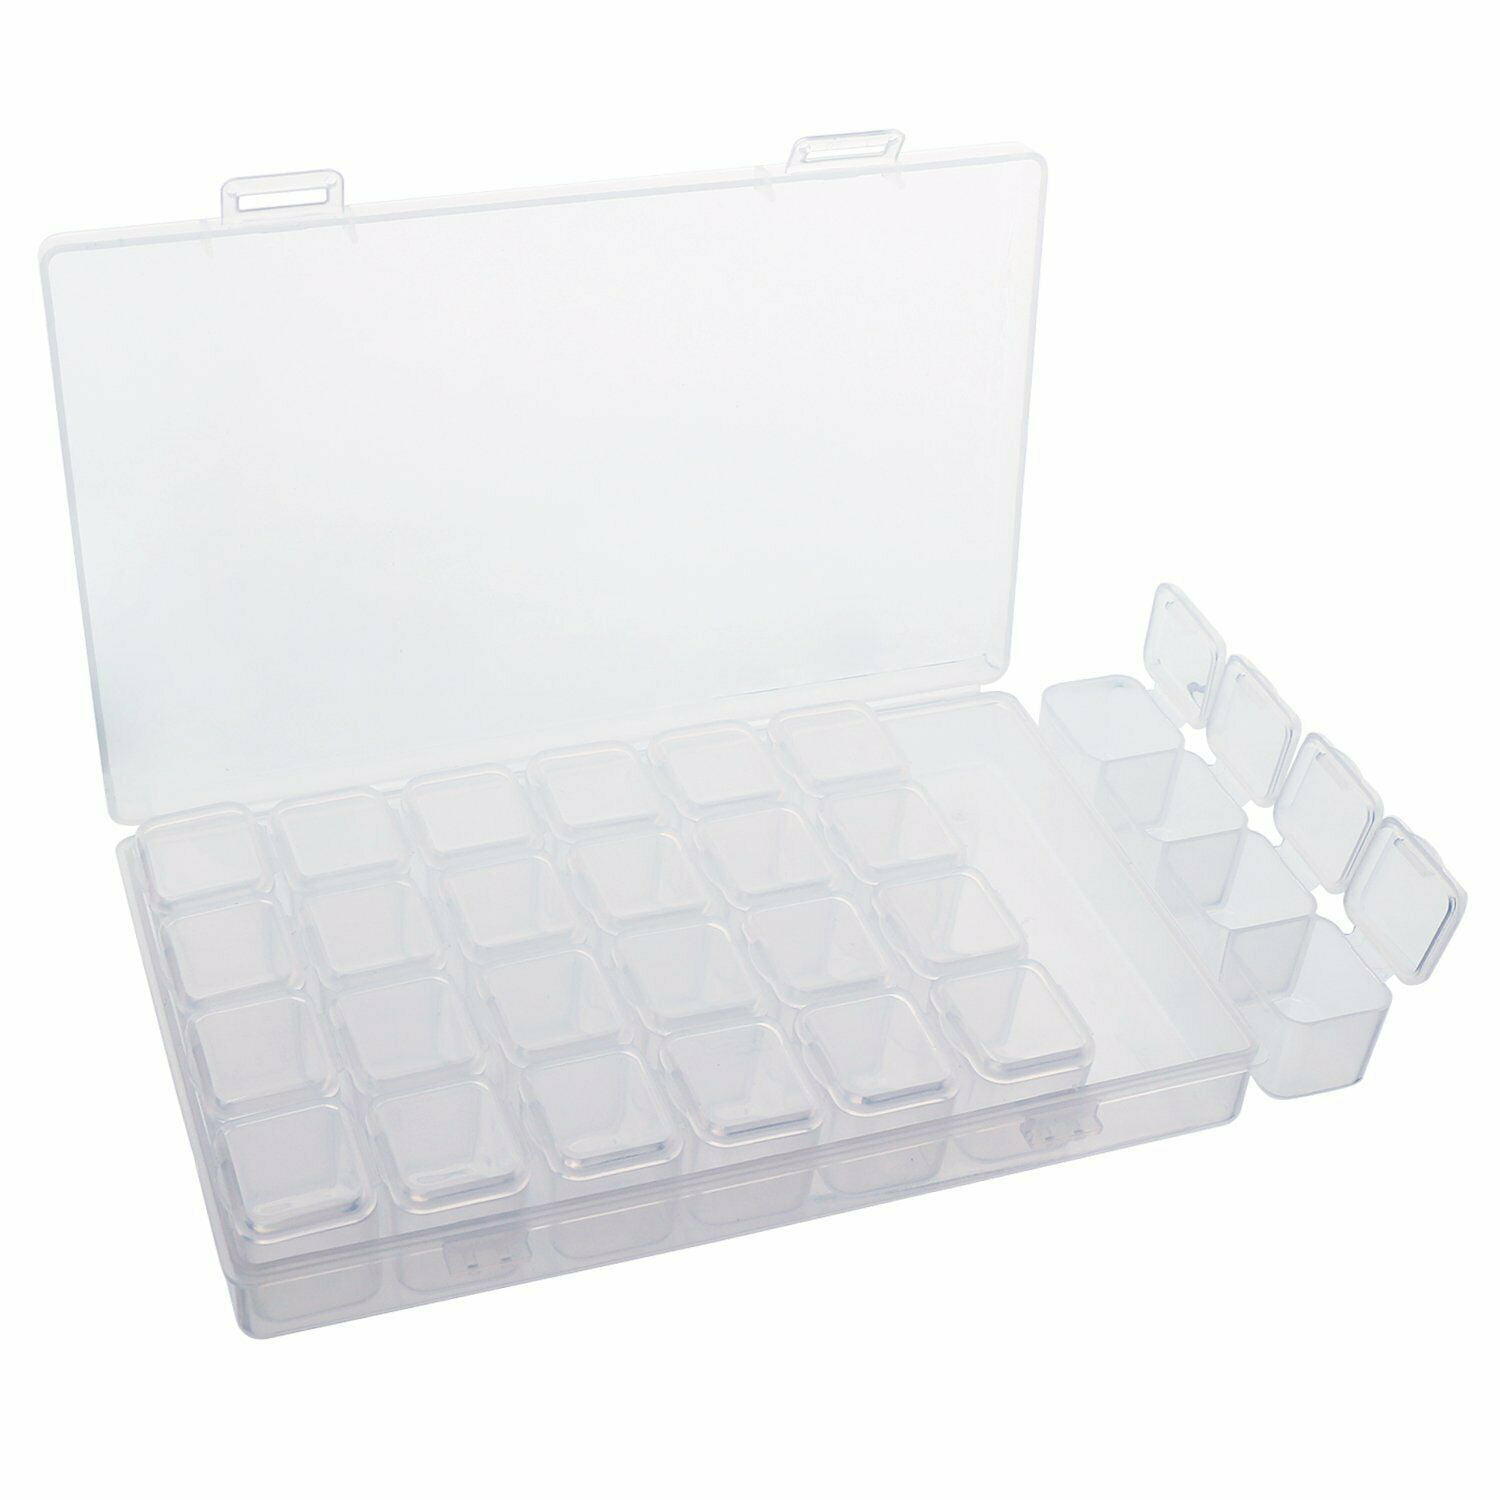 28 Grids Diamond Painting Embroidery Box Plastic Storage Containers Adjustable Bead Case 2 Pack 